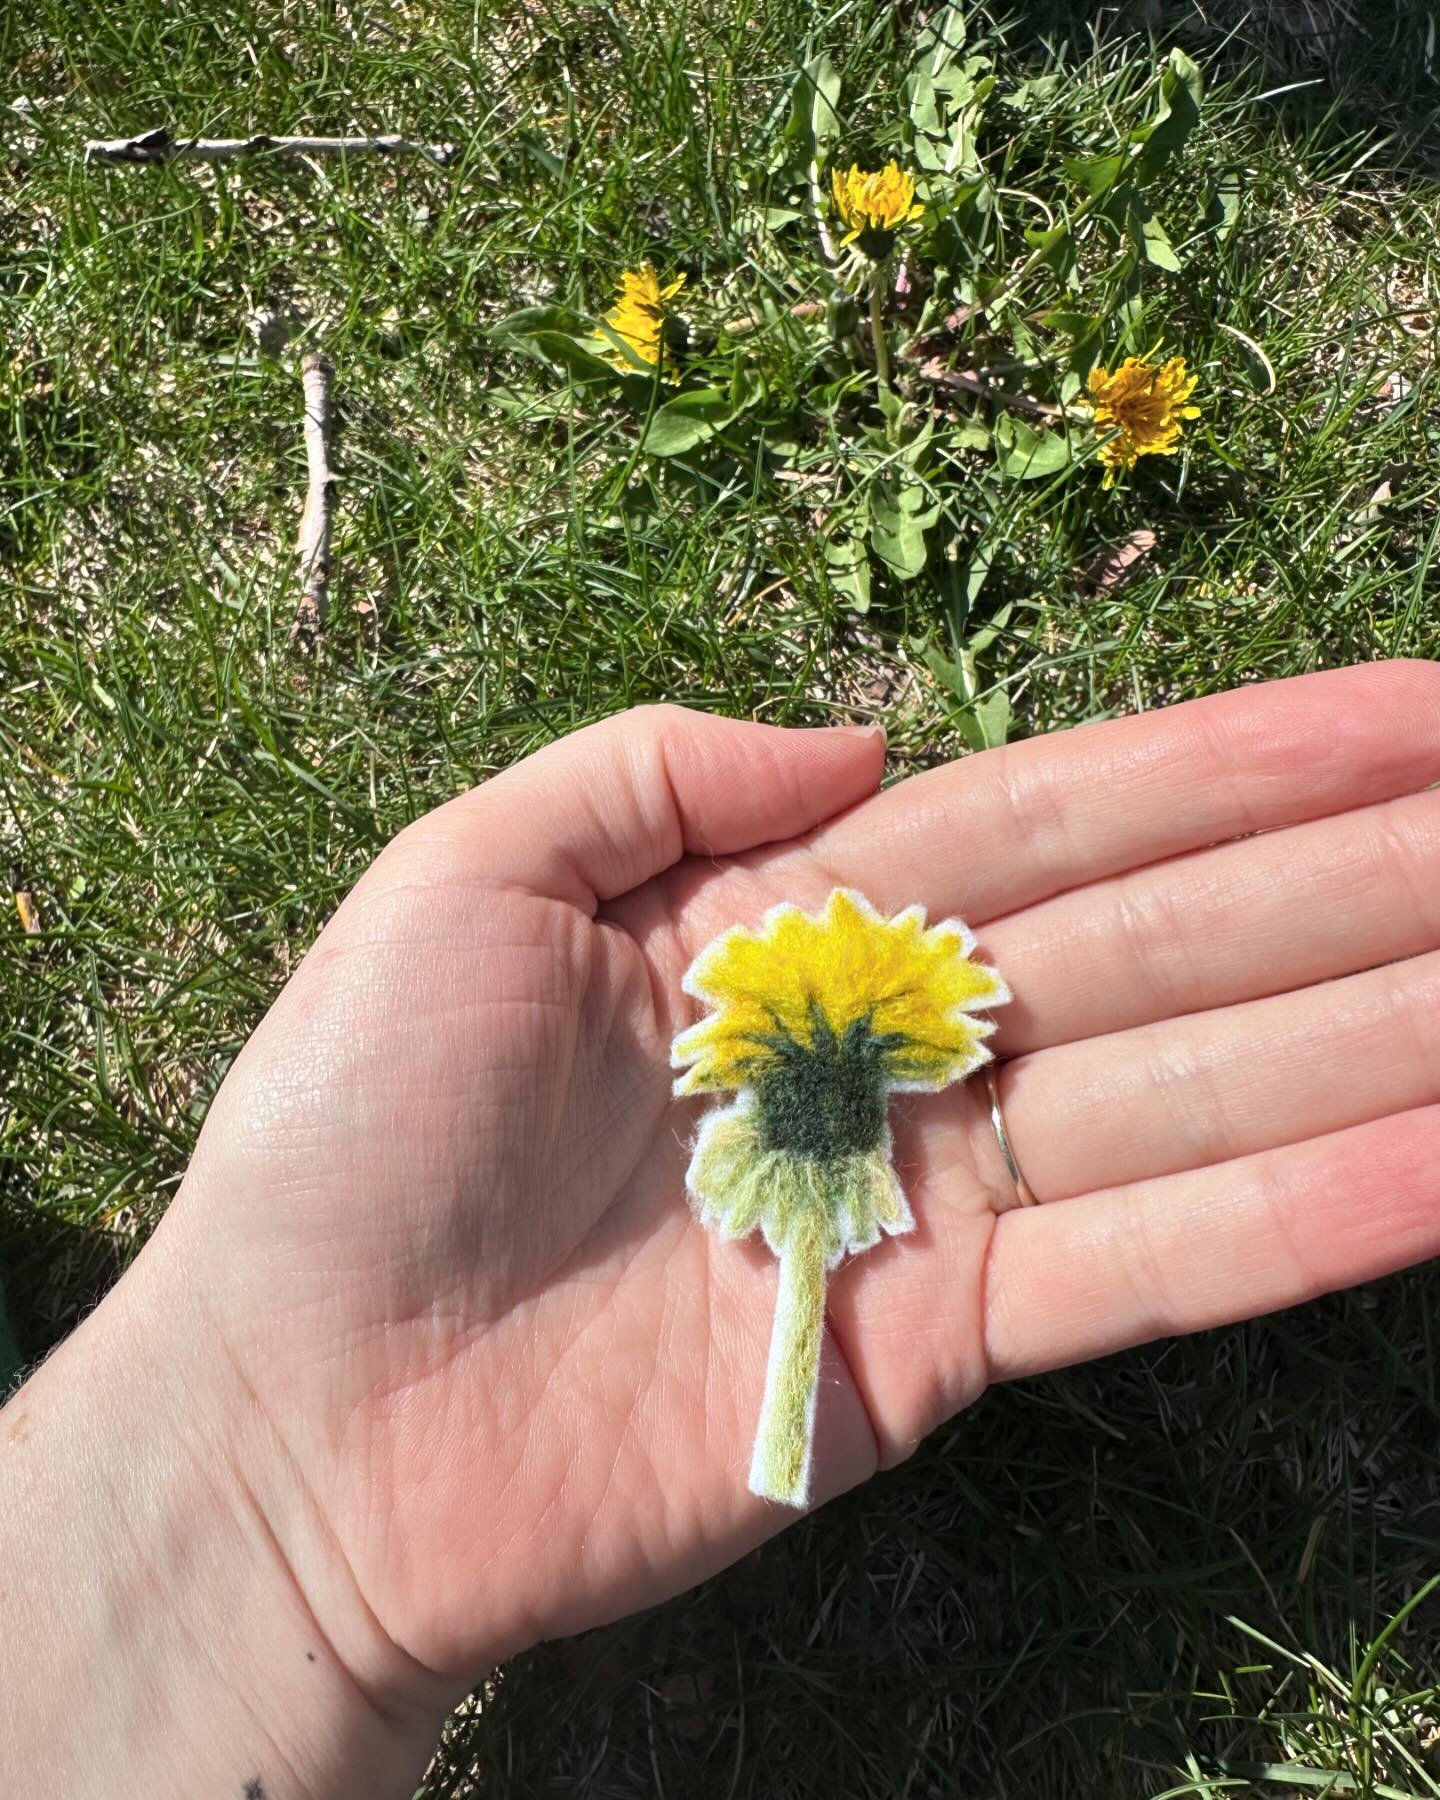 🌼So excited for next week&rsquo;s Crafting in the Wild! There are still spots available to join us in needle felting nature! Visit our website to learn more and enroll🤗

#naturinginmadison #naturingtogether #getoutsideandplay
#fitchburgwi #madisonw